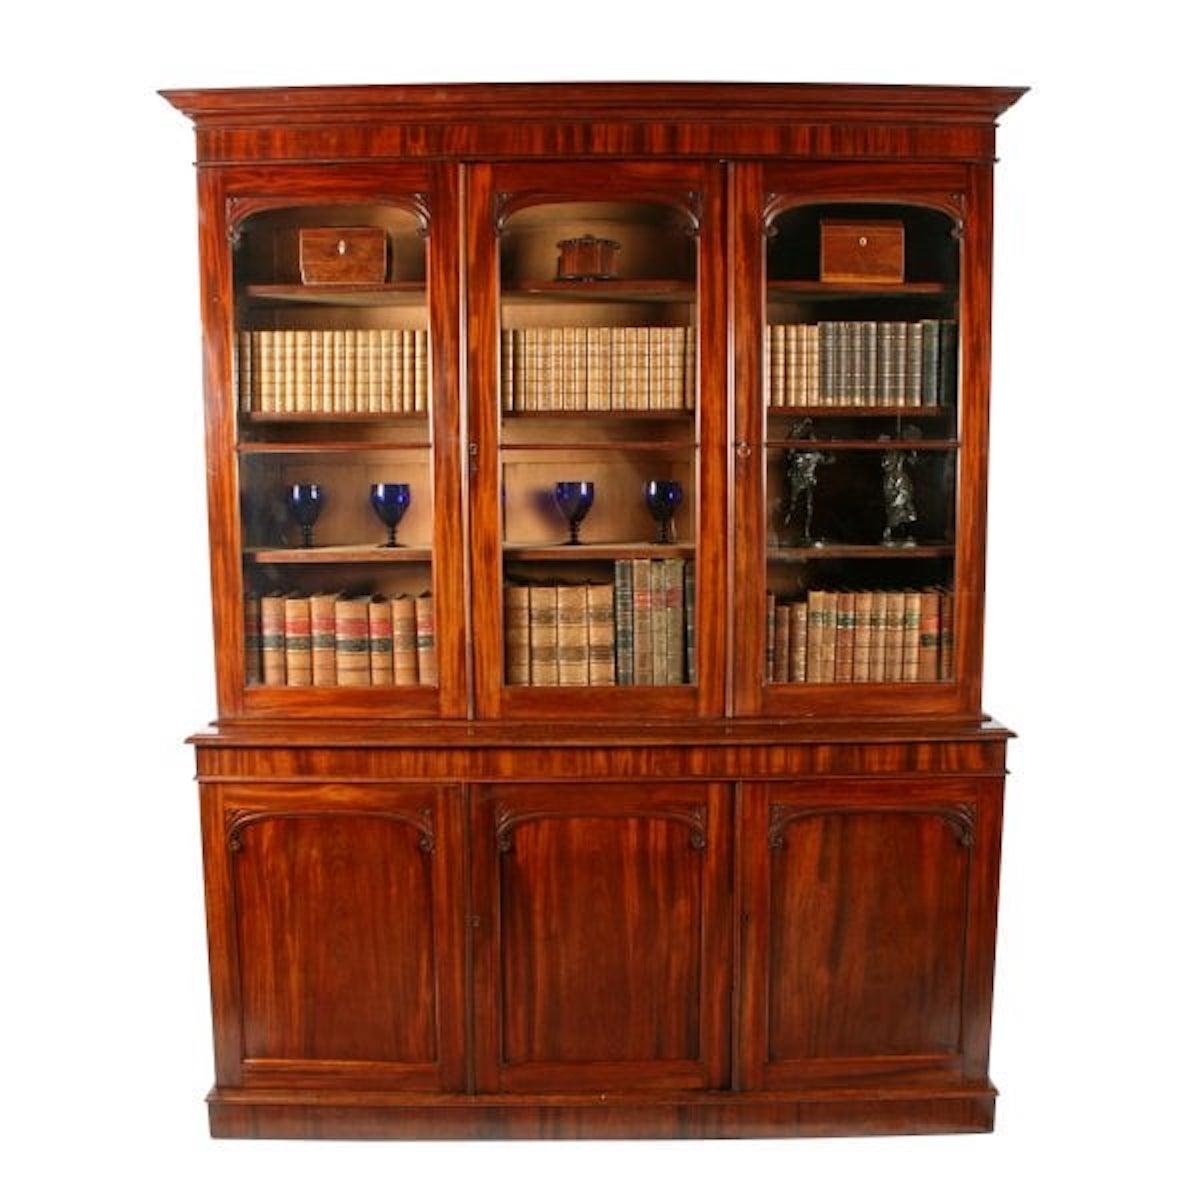 Victorian Mahogany three door bookcase

A middle of the 19th century Victorian mahogany three door cabinet bookcase.

The bookcase has three glazed doors to the top with a glazing bar and scroll decoration to each door.

The middle and left